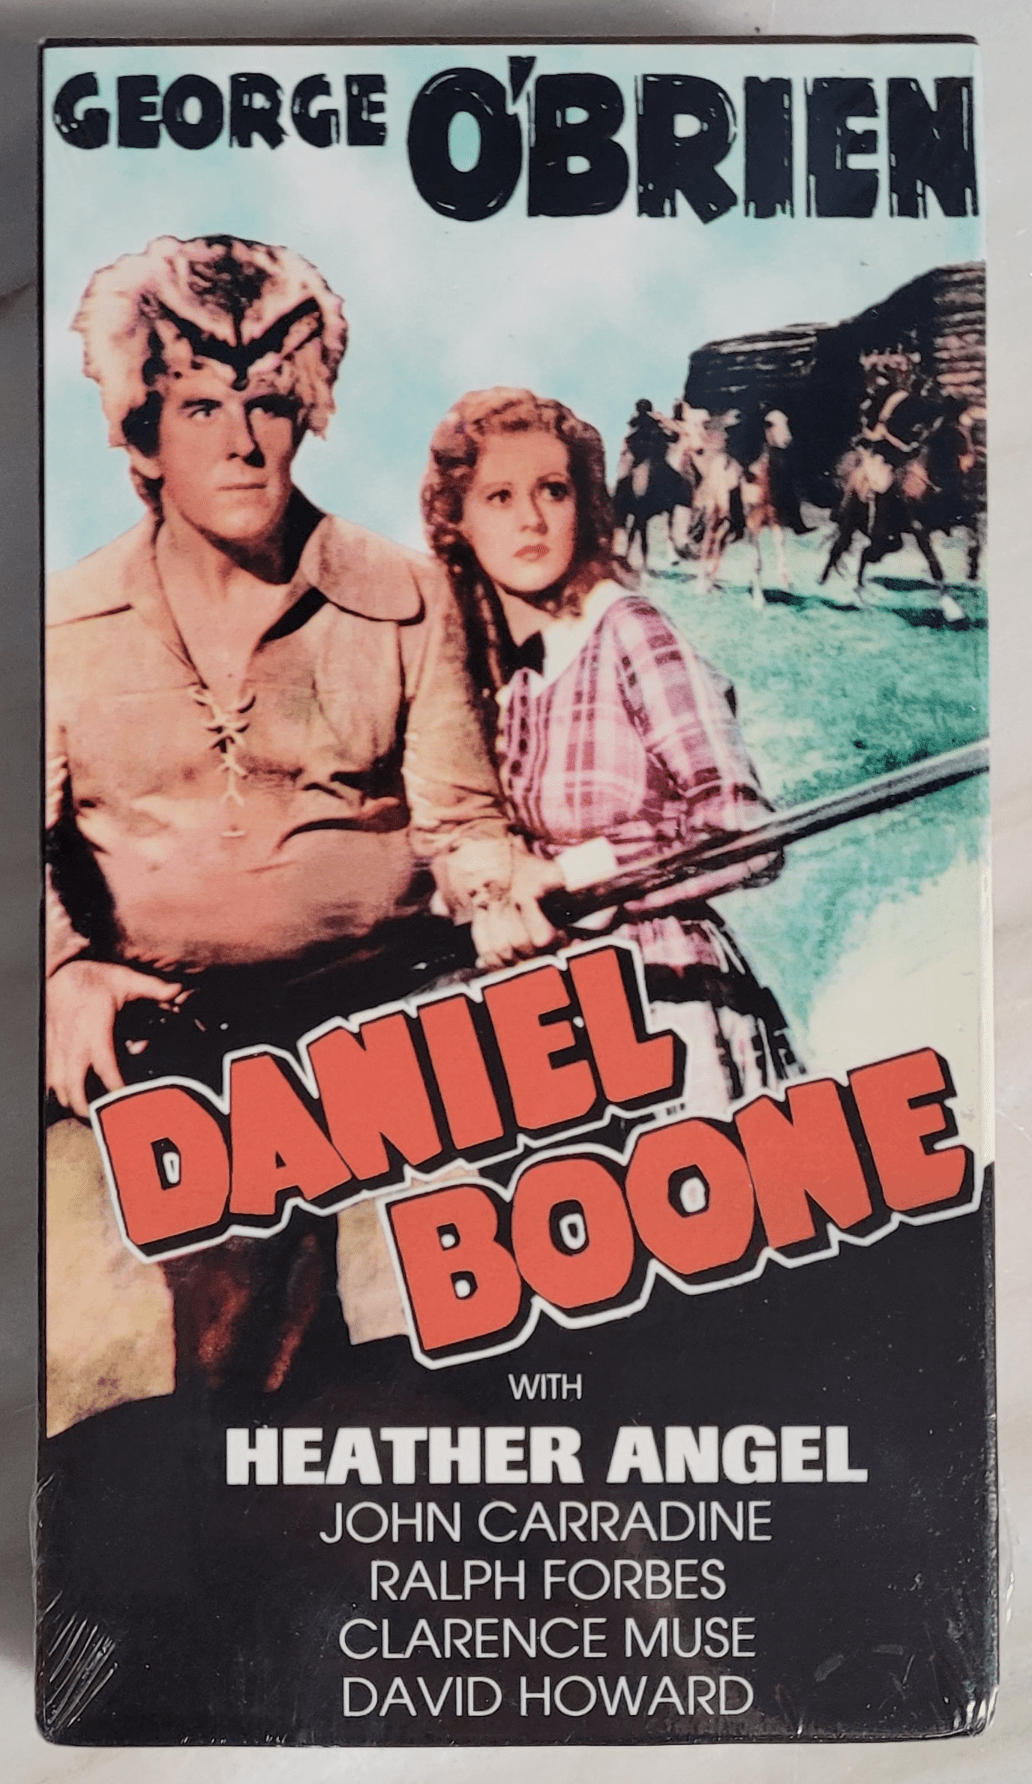 Daniel Boone Starring George O'Brien VHS - Front View